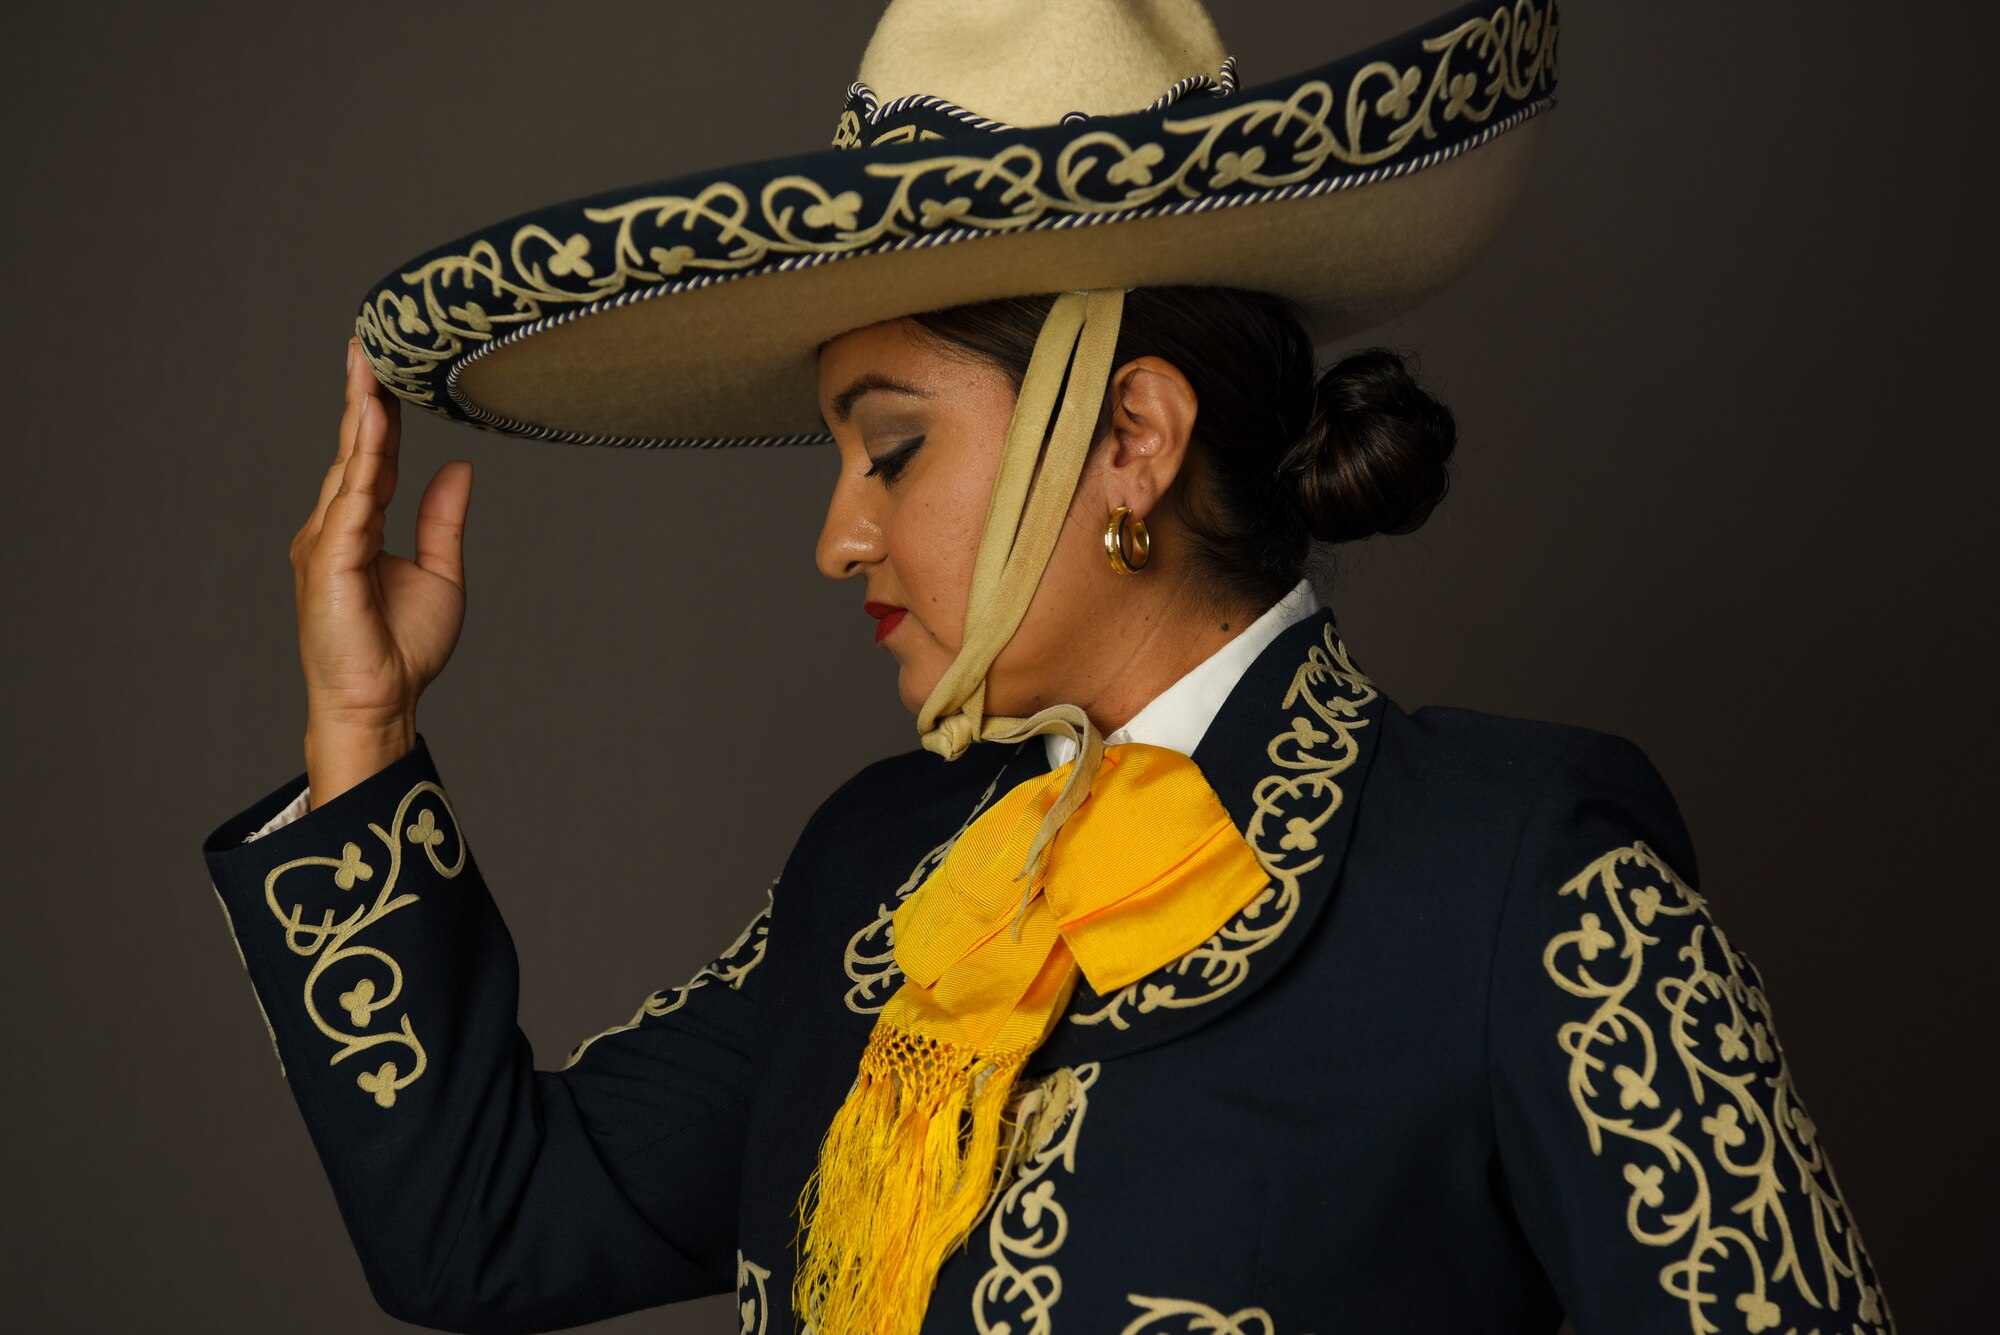 Ballet Folklorico: an Airman’s culture expressed through dance